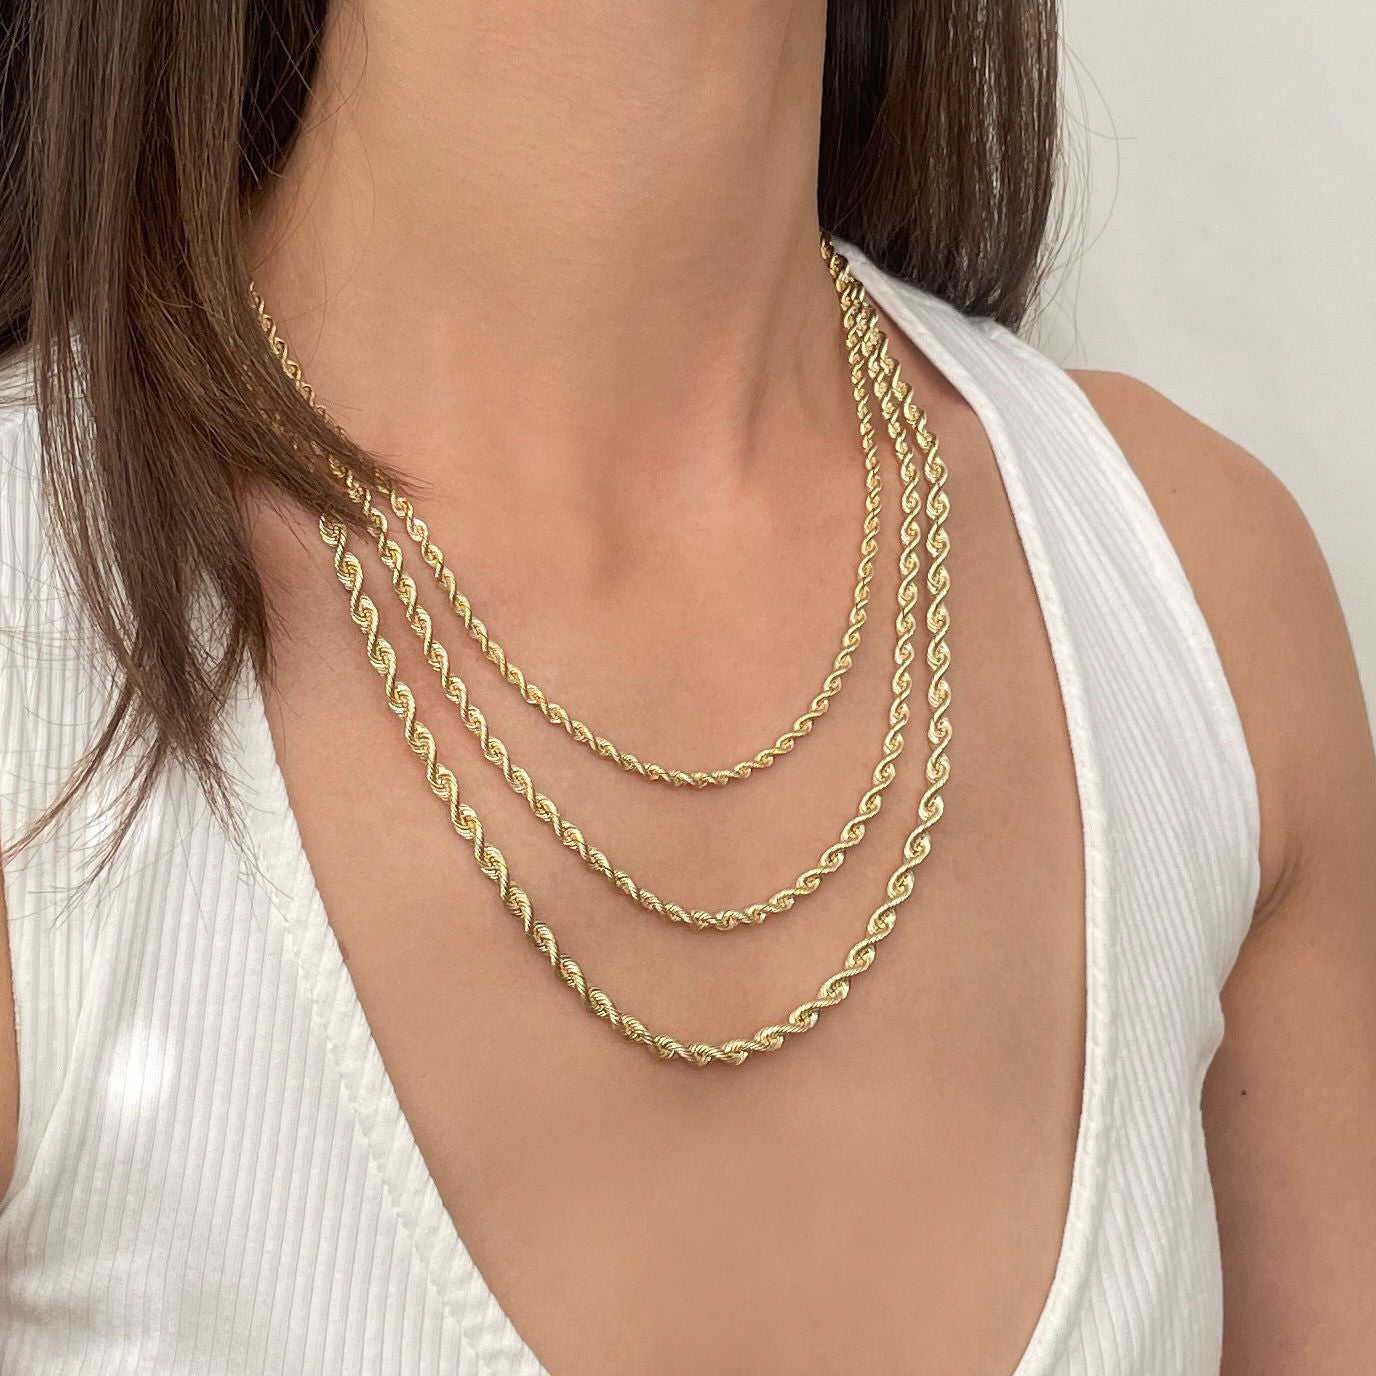 14K SOLID YELLOW GOLD ROPE NECKLACE CHAIN